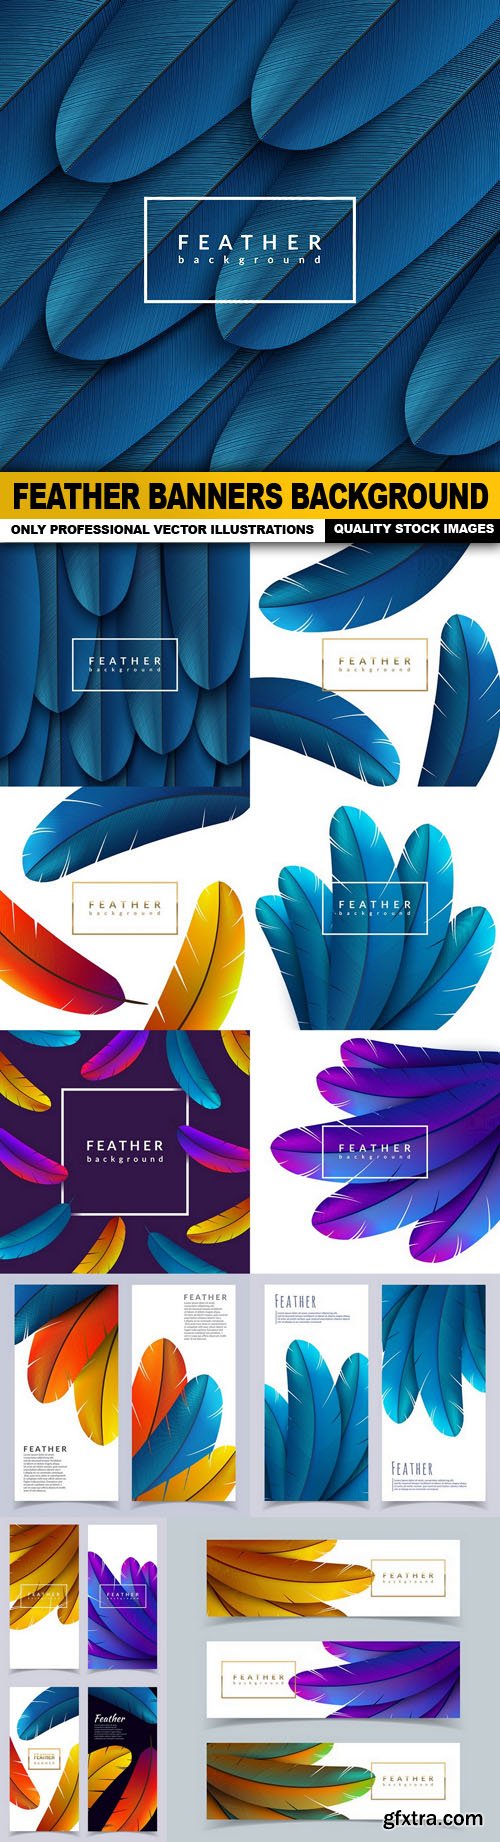 Feather Banners Background - 12 Vector